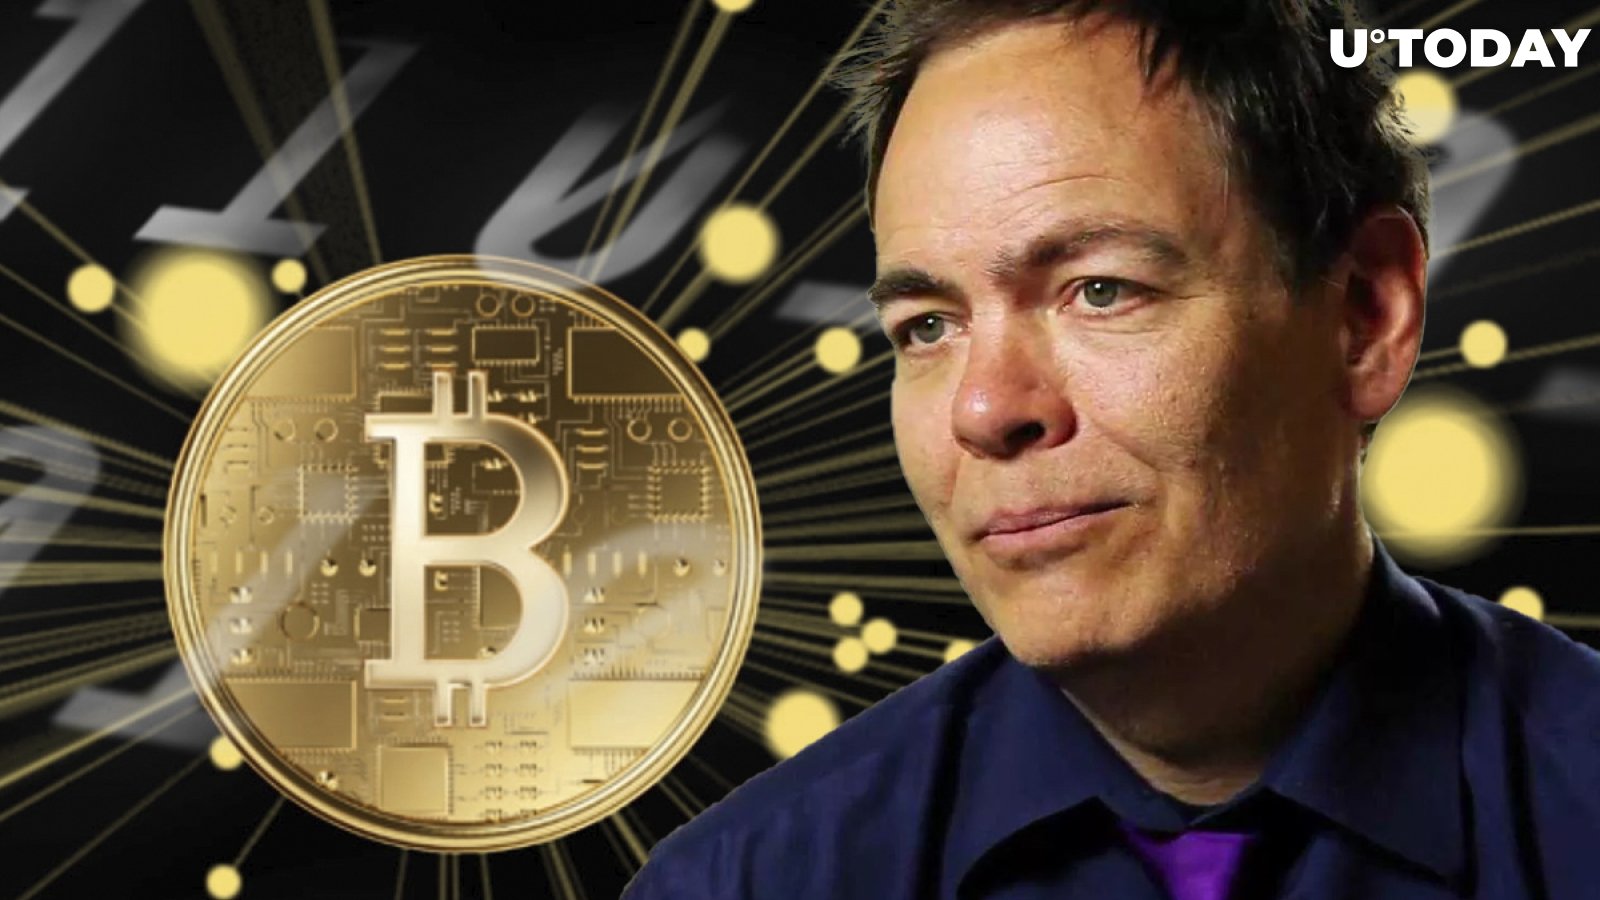 When Bitcoin Hits $100,000, “Real” Panic Around Coming USD Hyperinflation Will Begin: Max Keiser